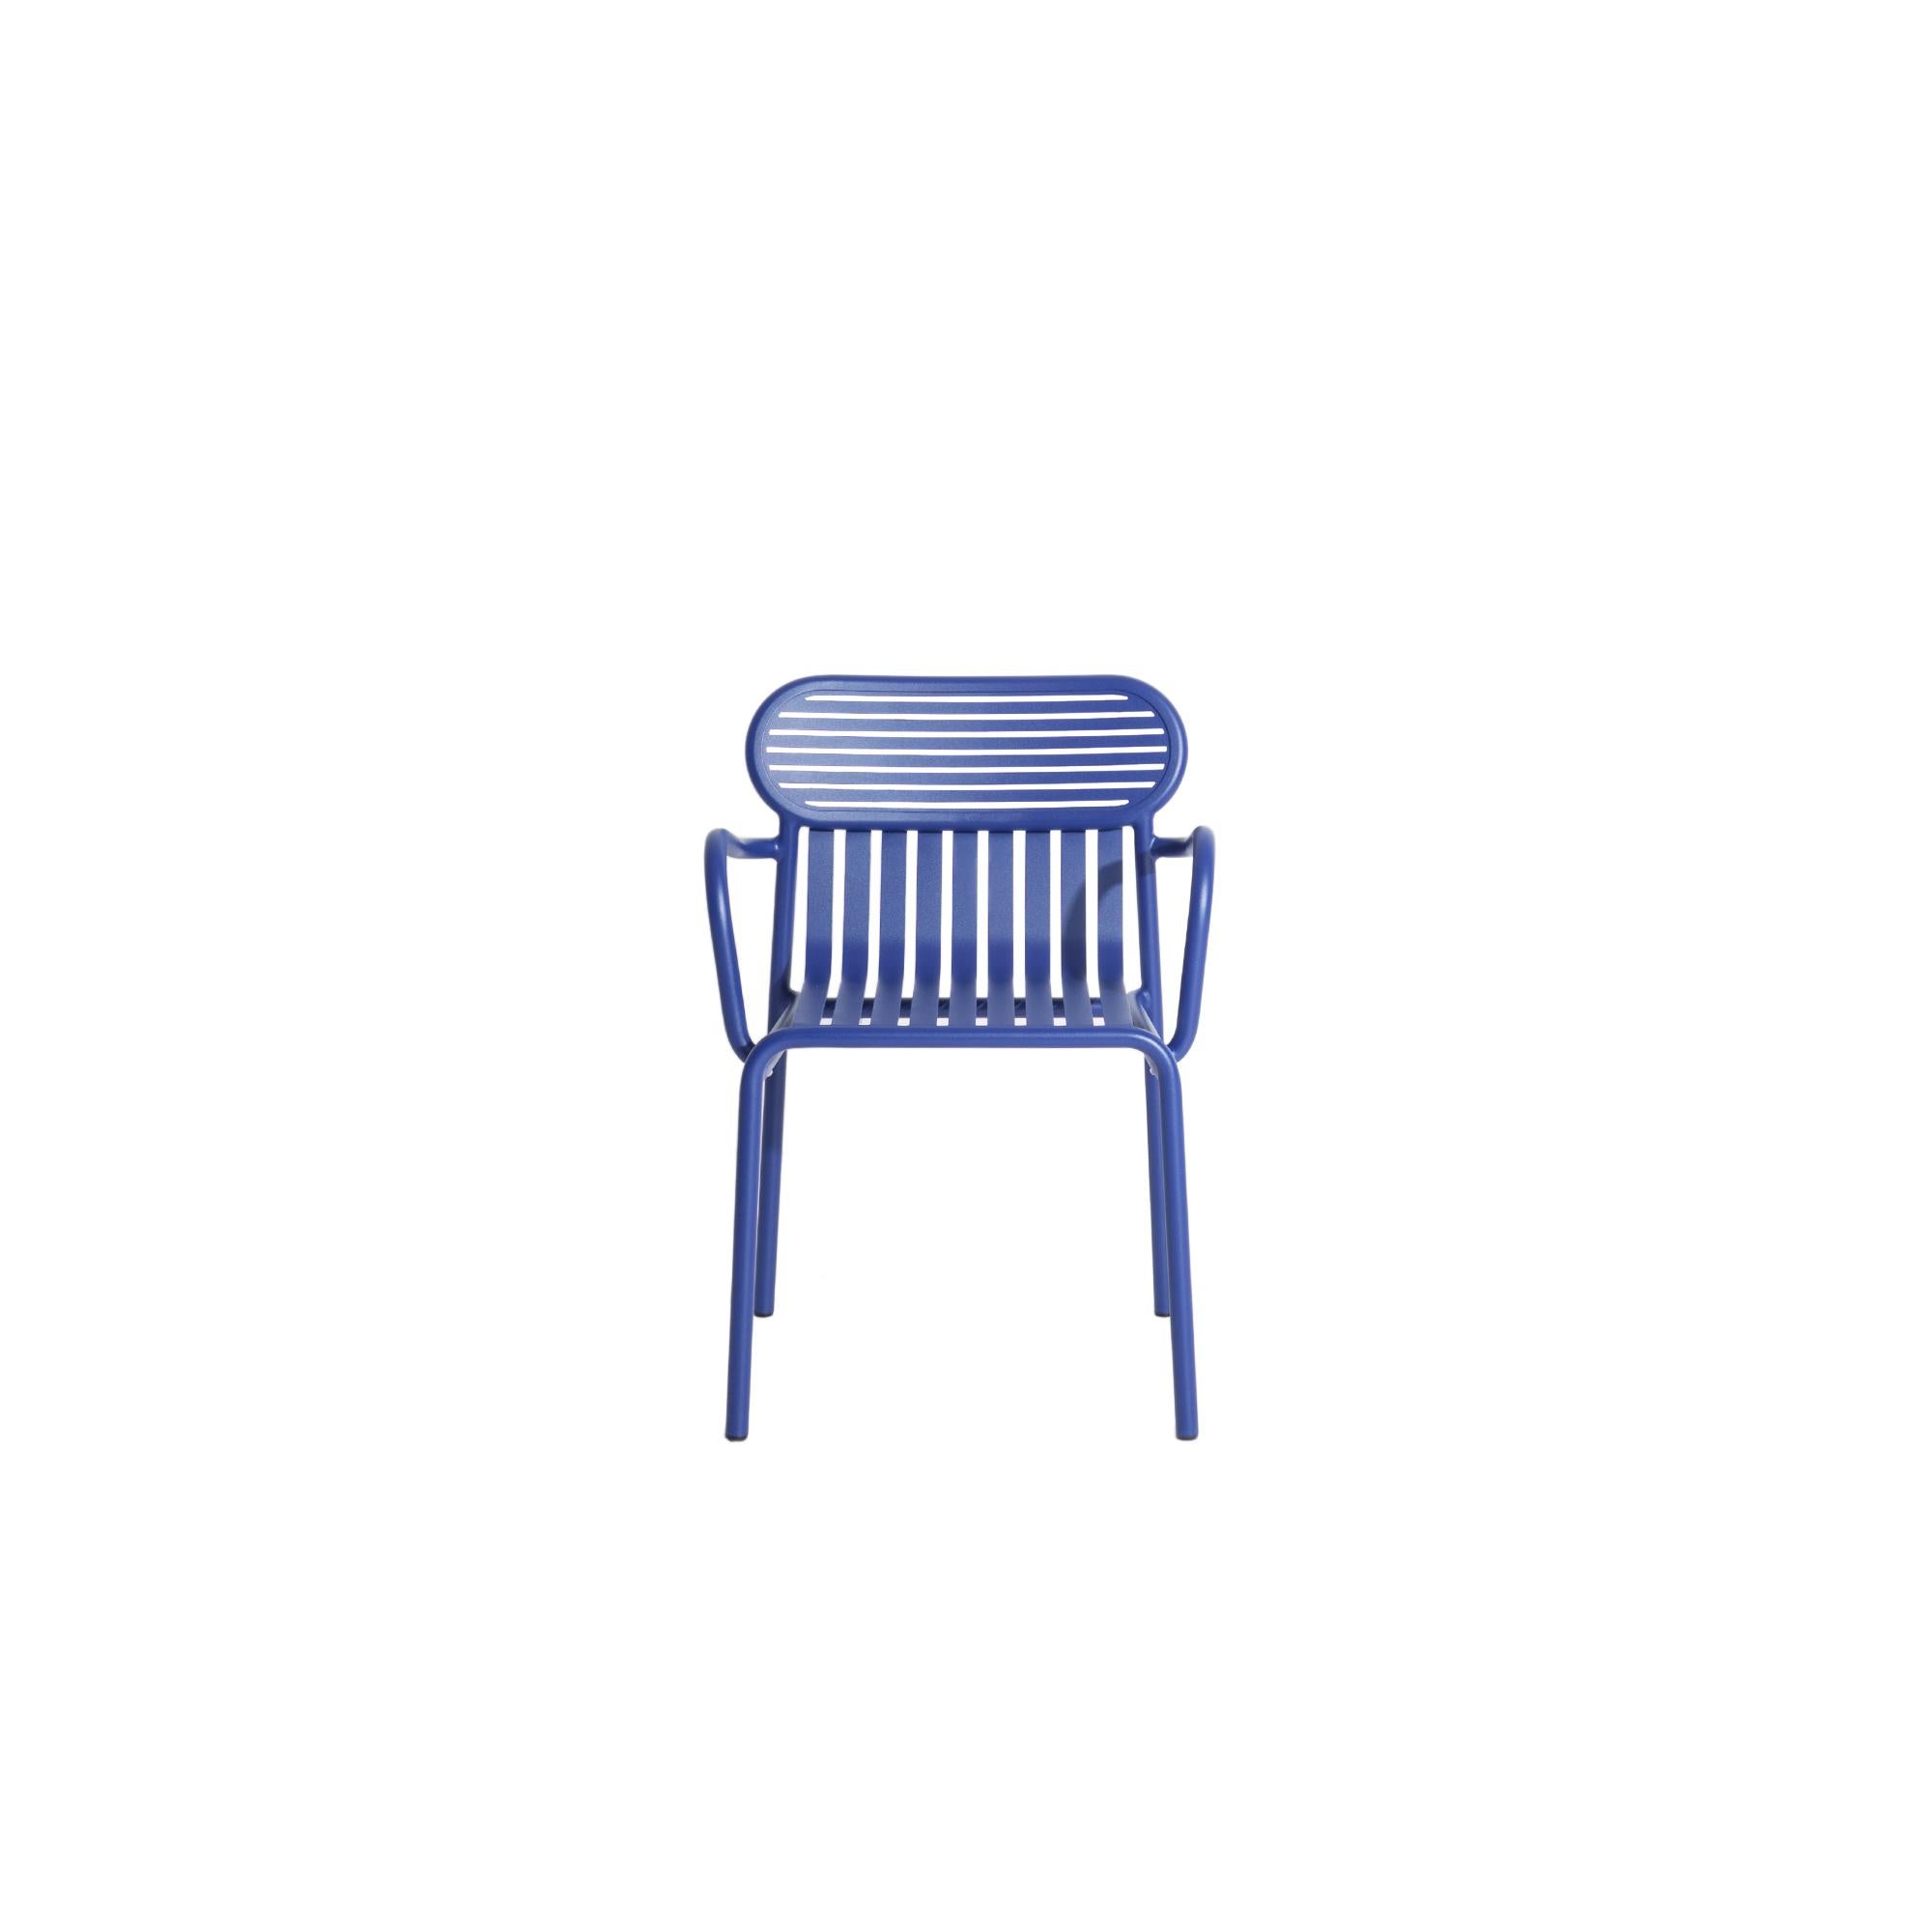 Petite Friture Week-End Bridge Chair in Blue Aluminium by Studio BrichetZiegler, 2017

The week-end collection is a full range of outdoor furniture, in aluminium grained epoxy paint, matt finish, that includes 18 functions and 8 colours for the